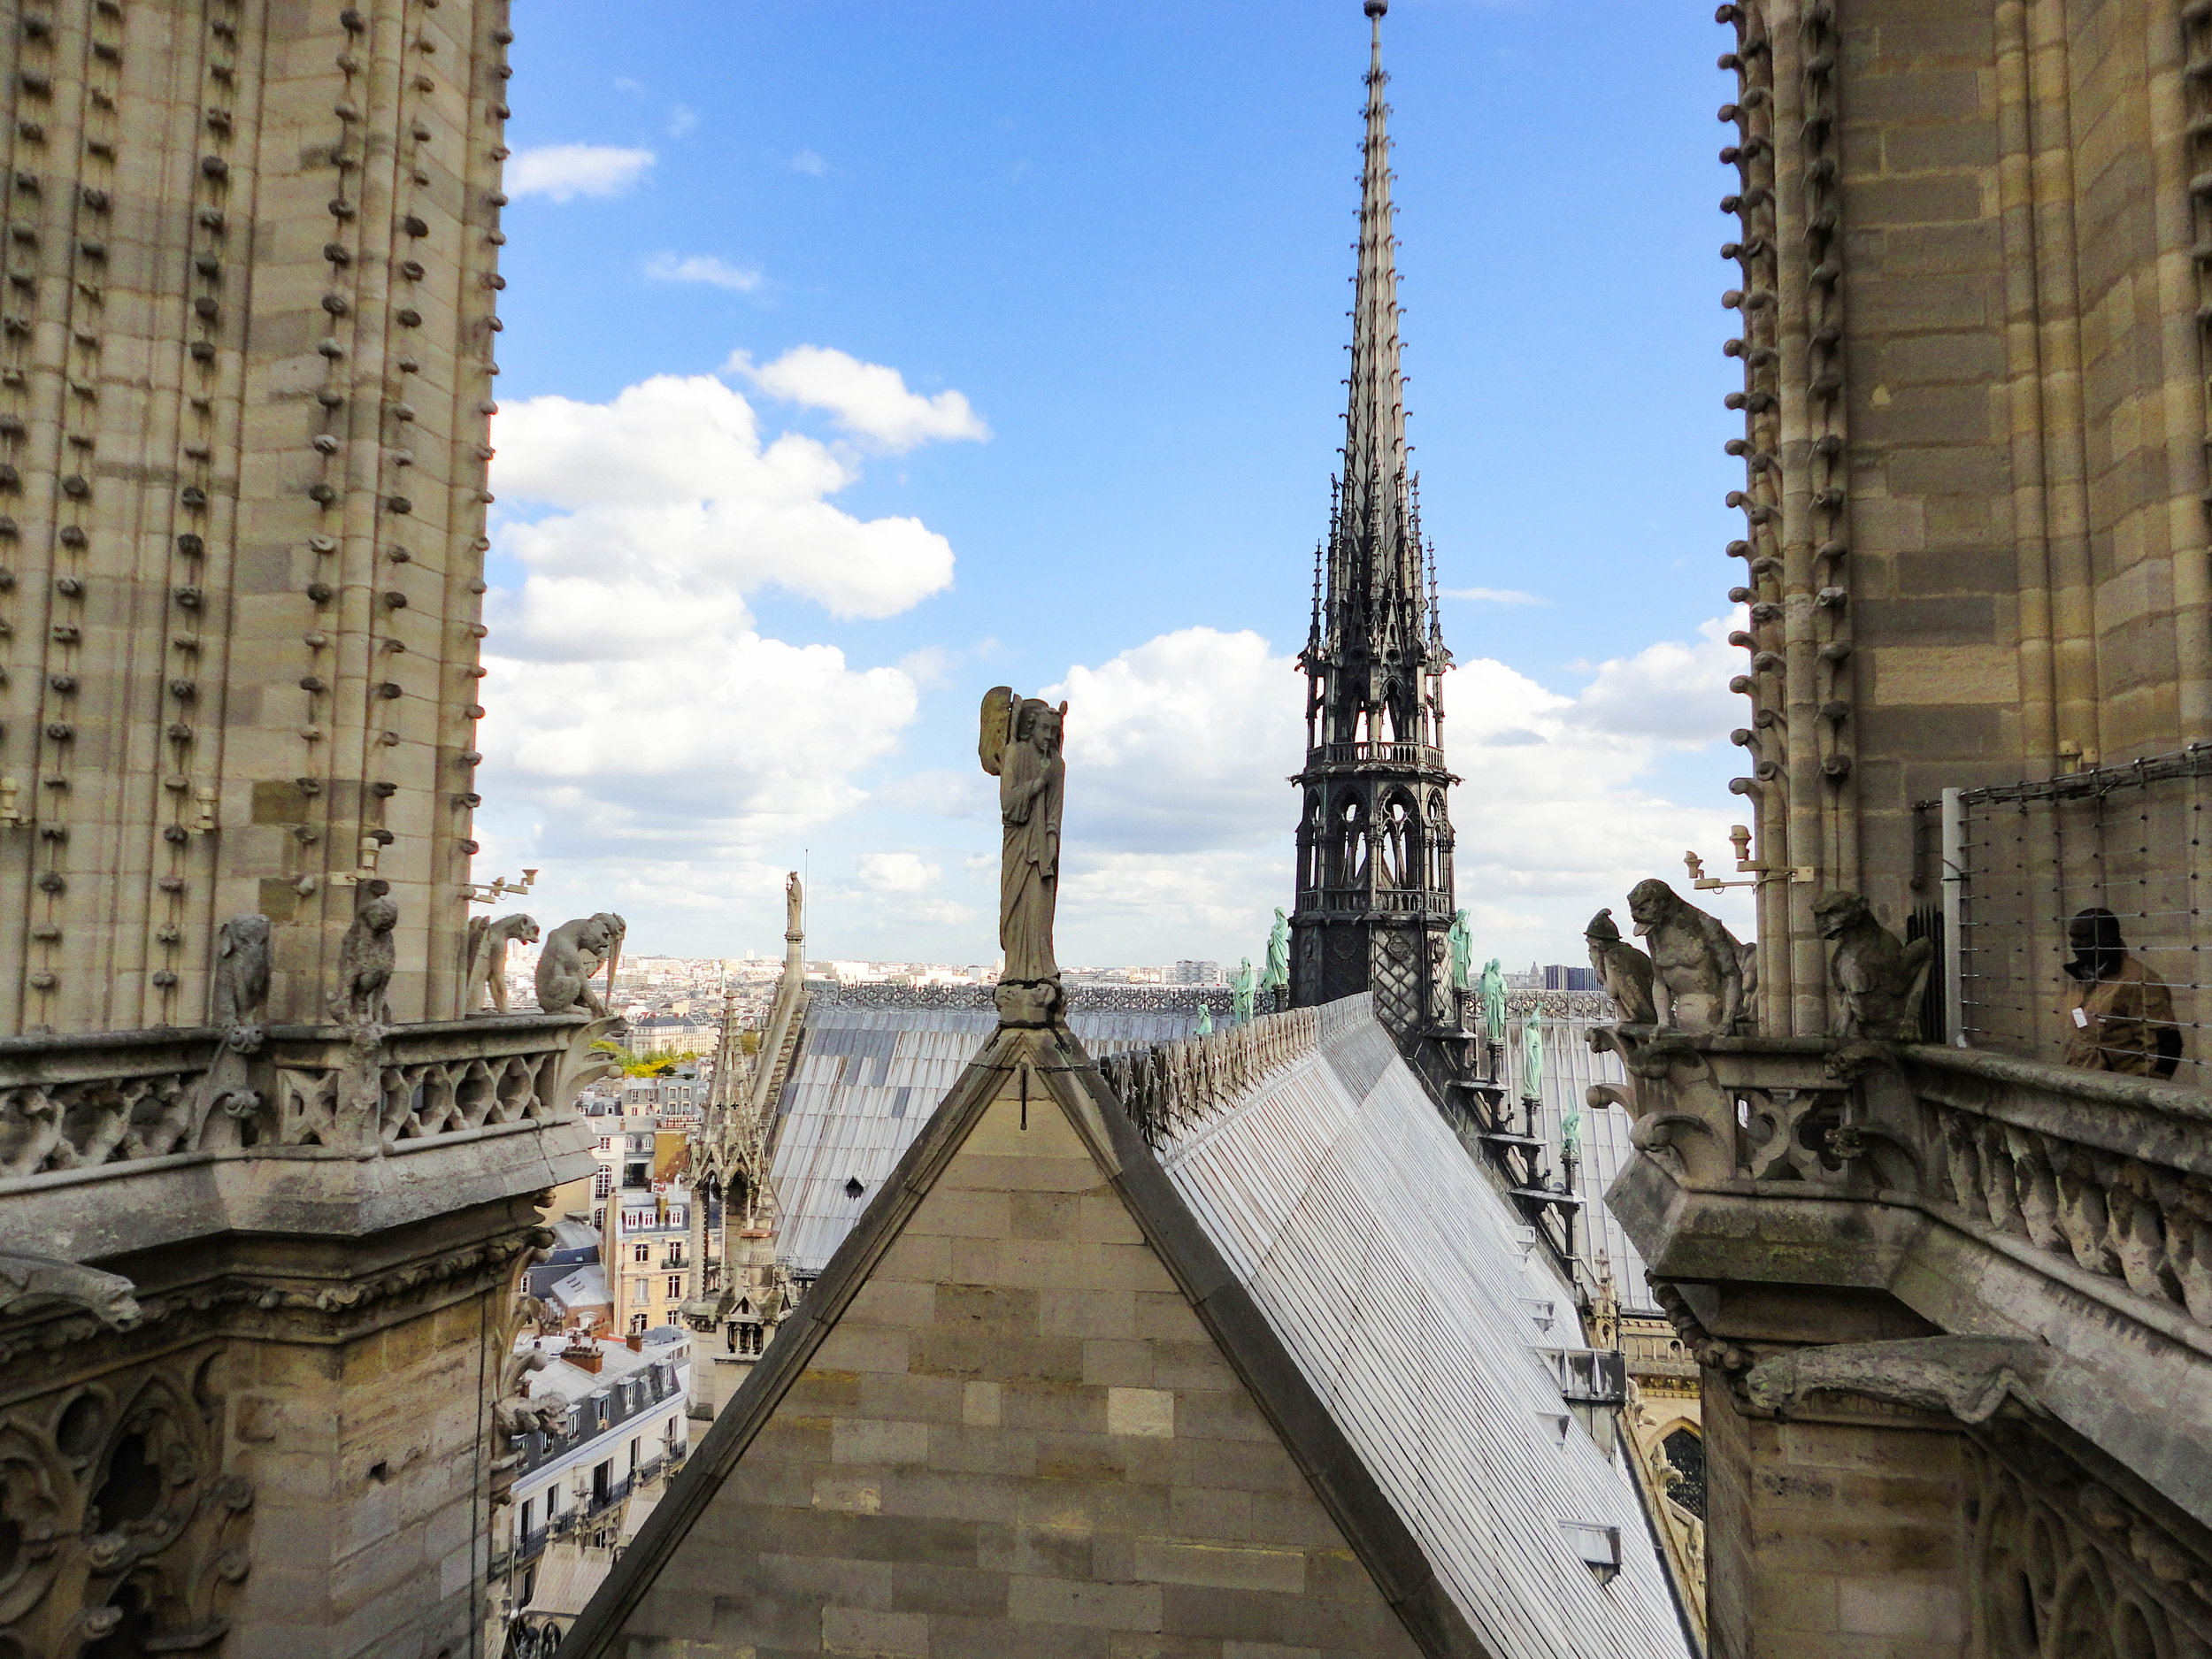 Notre Dame tower roof before the fire